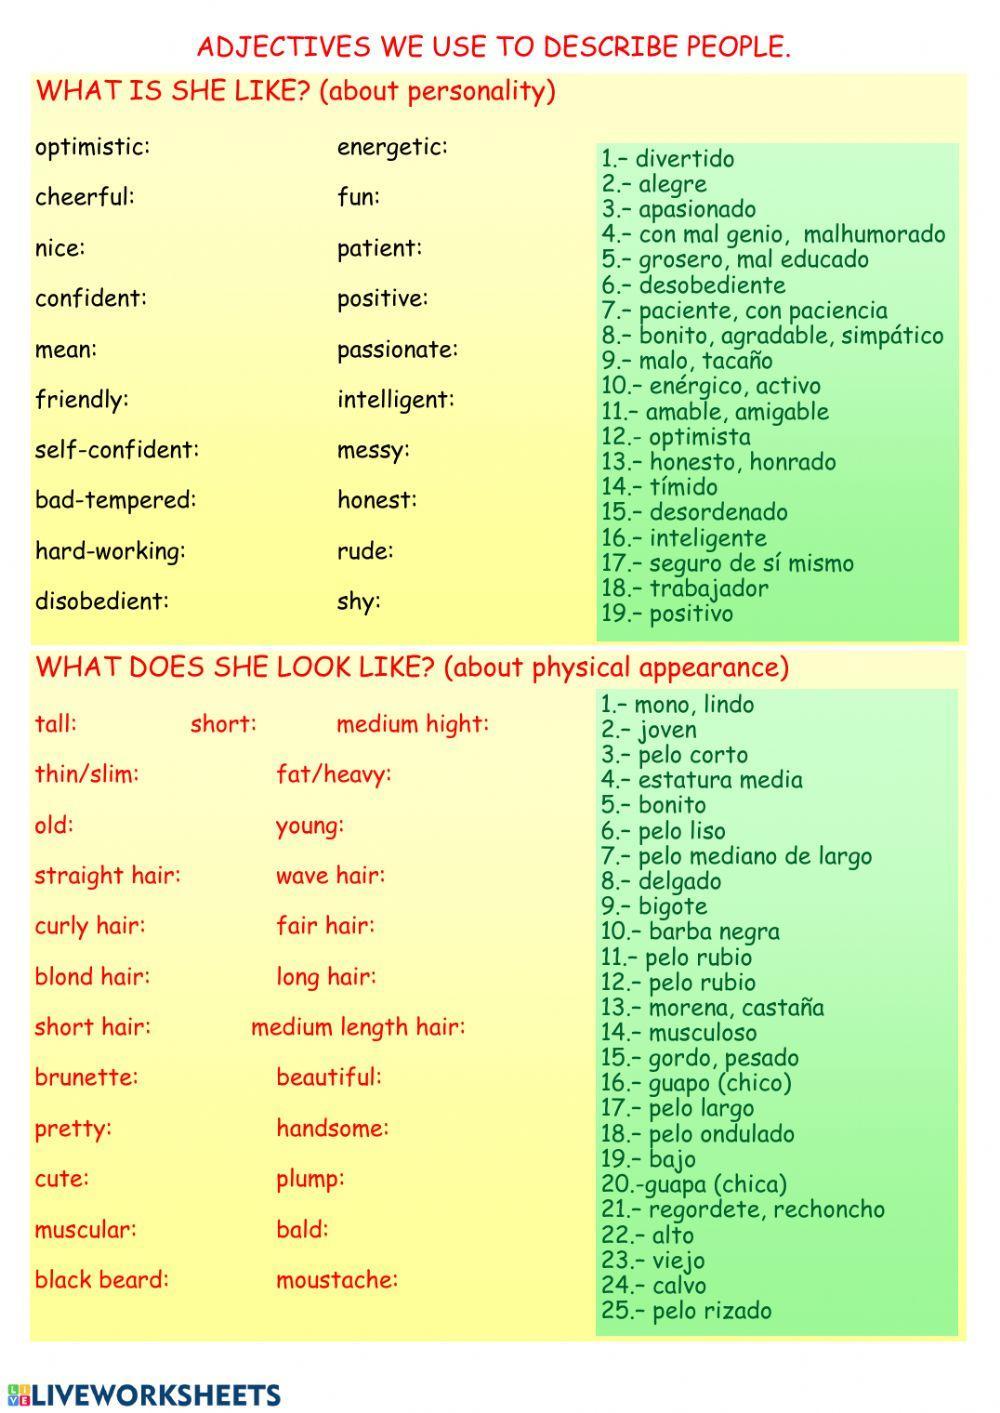 Adjectives to describe people